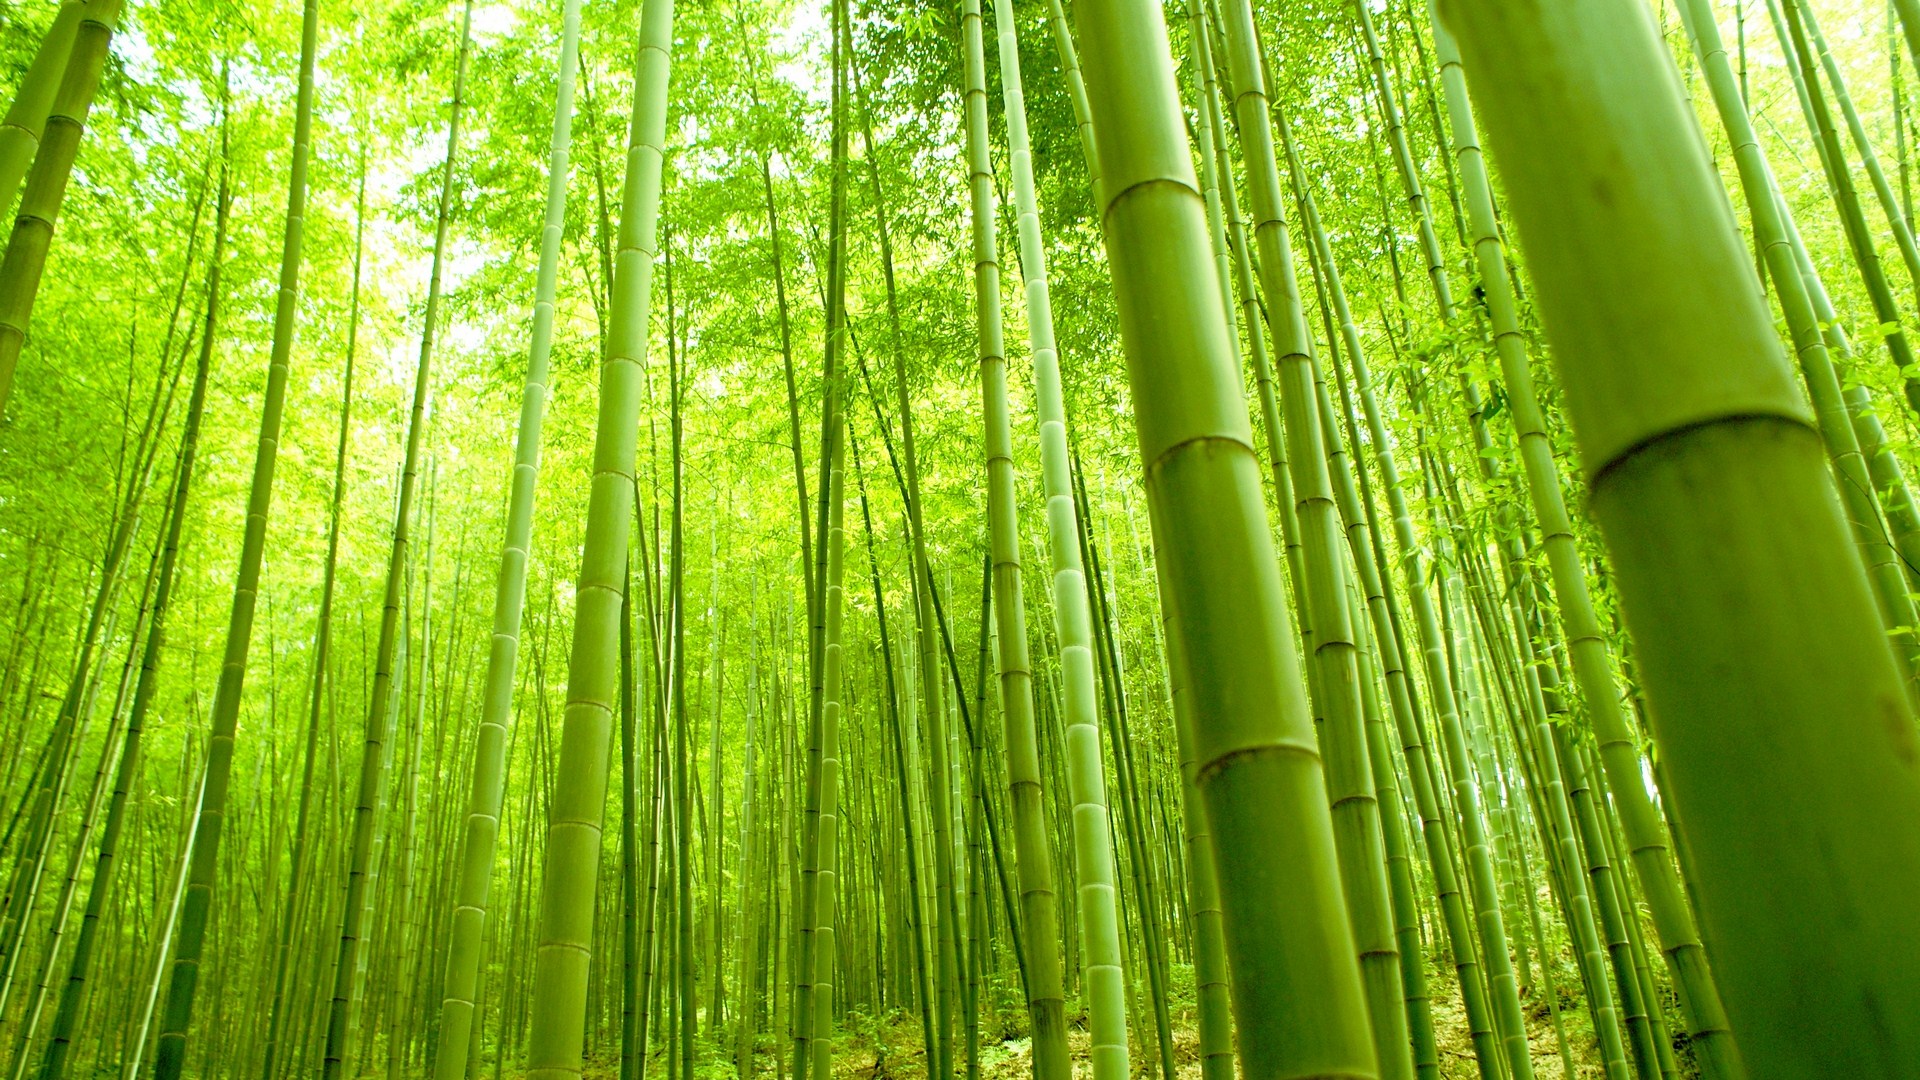 Bamboo Forest Nature Green Fresh